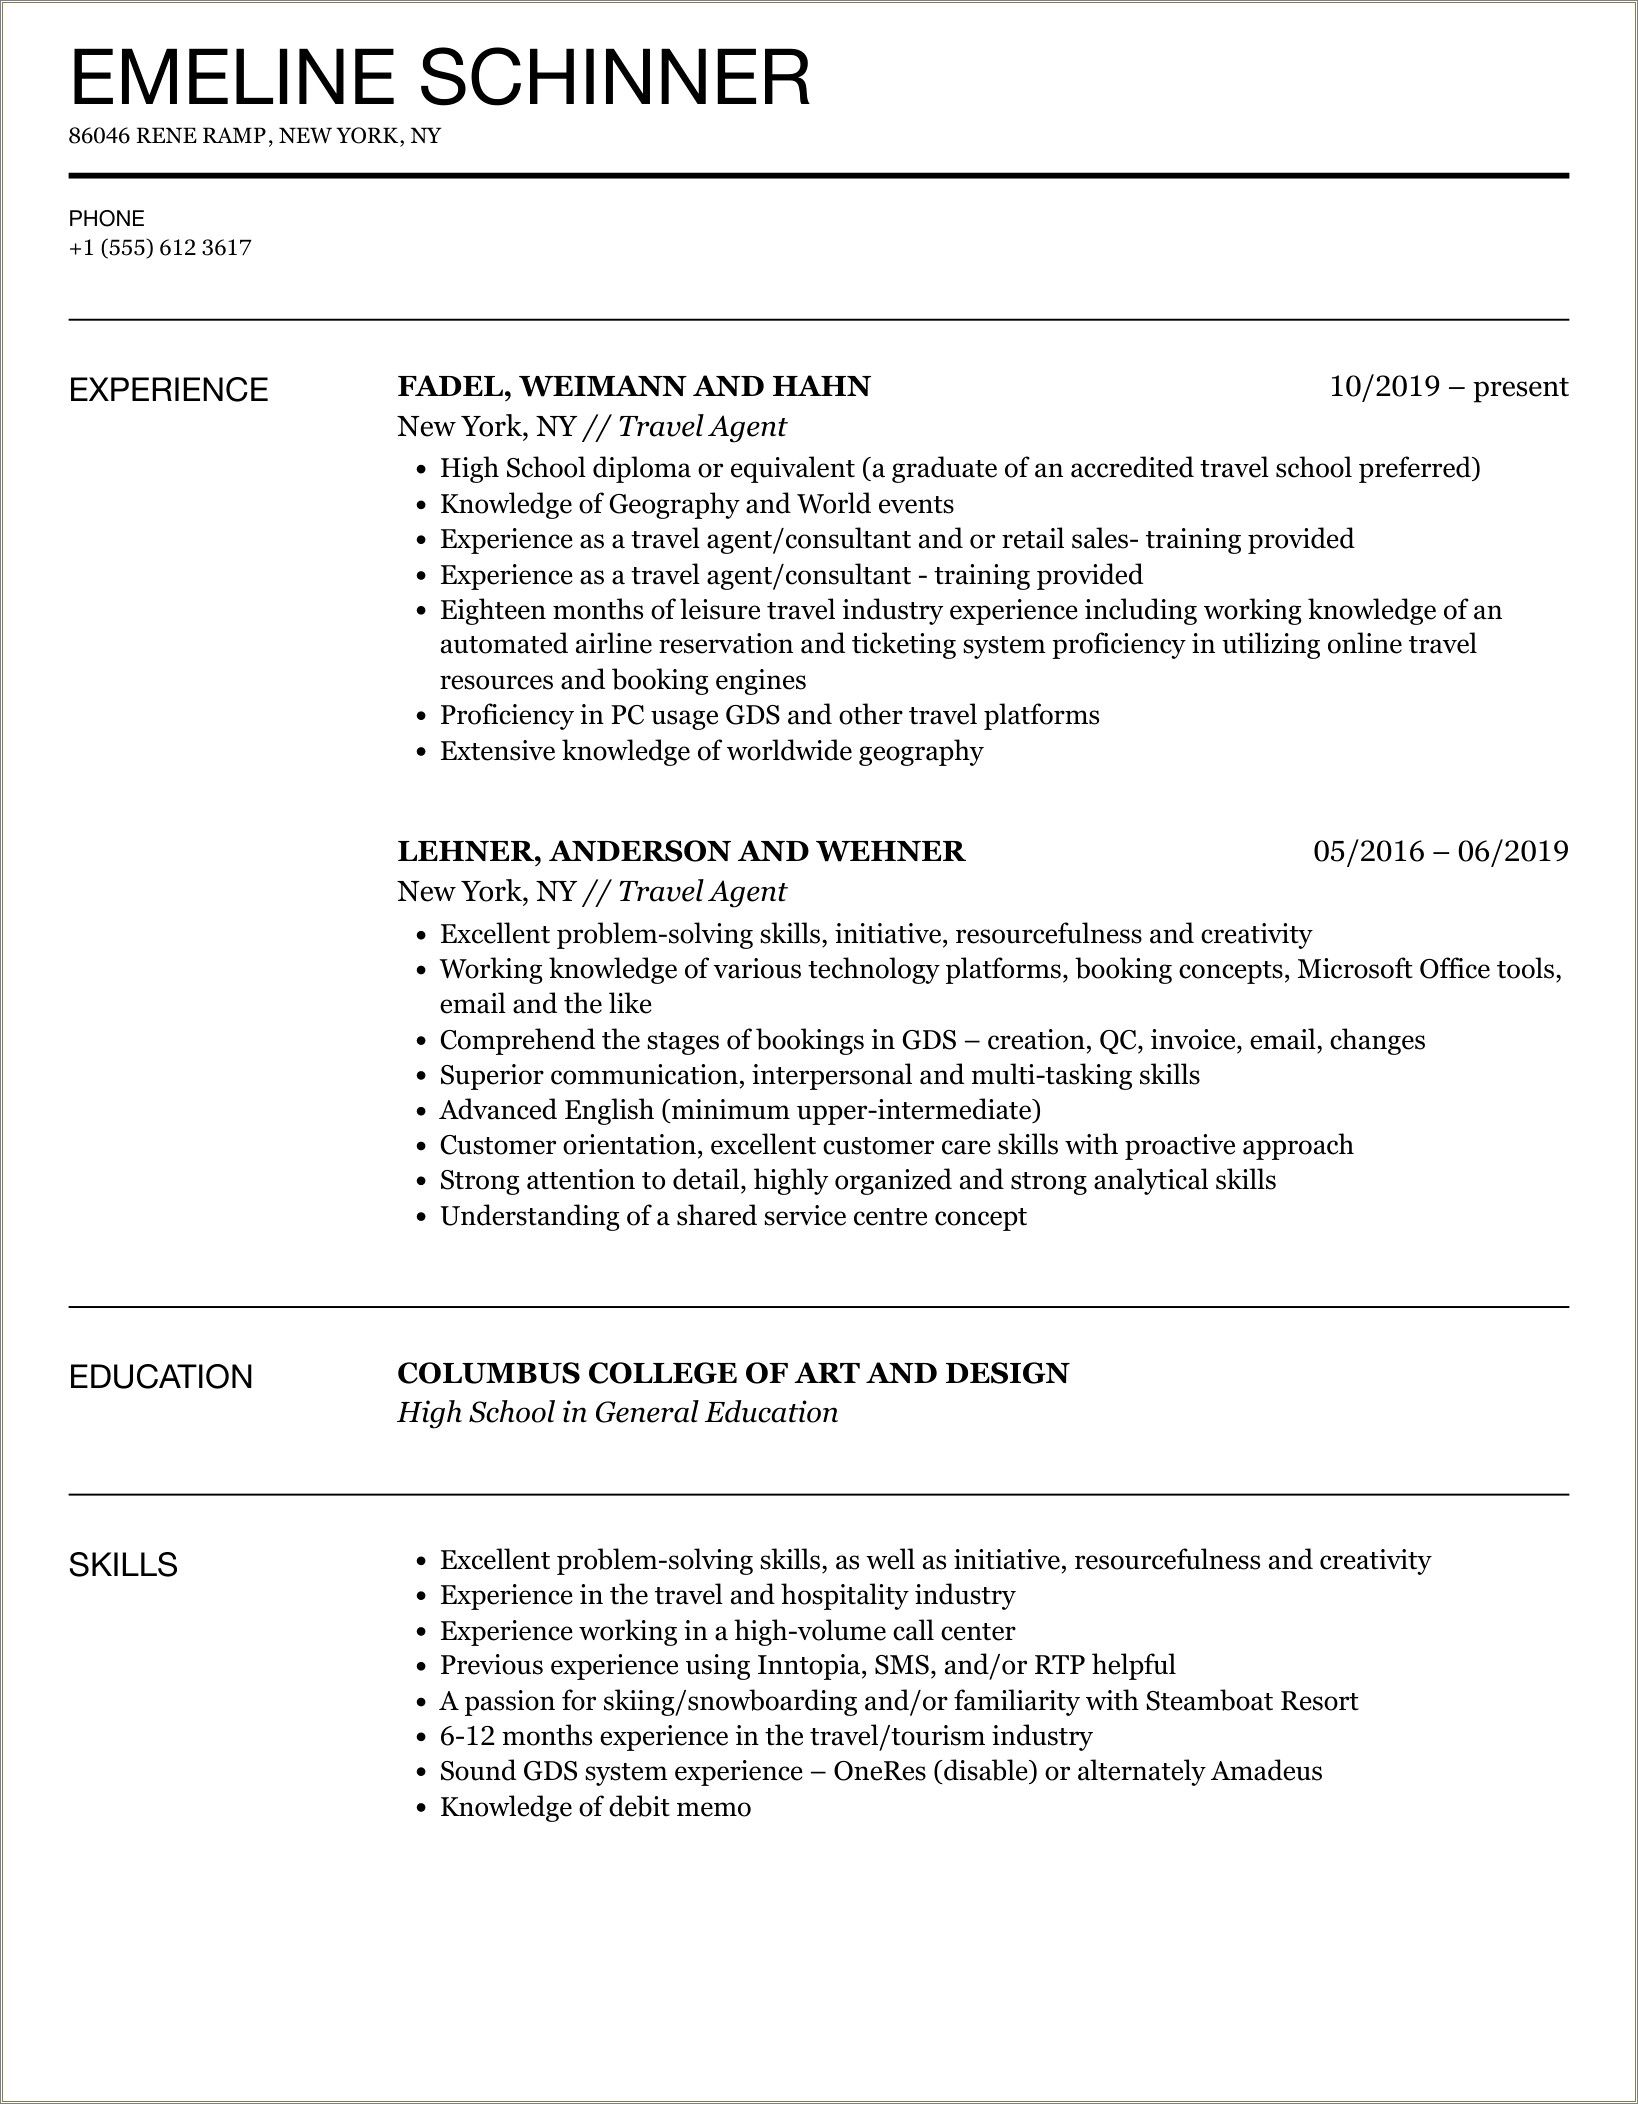 Resume Objective For Work And Travel